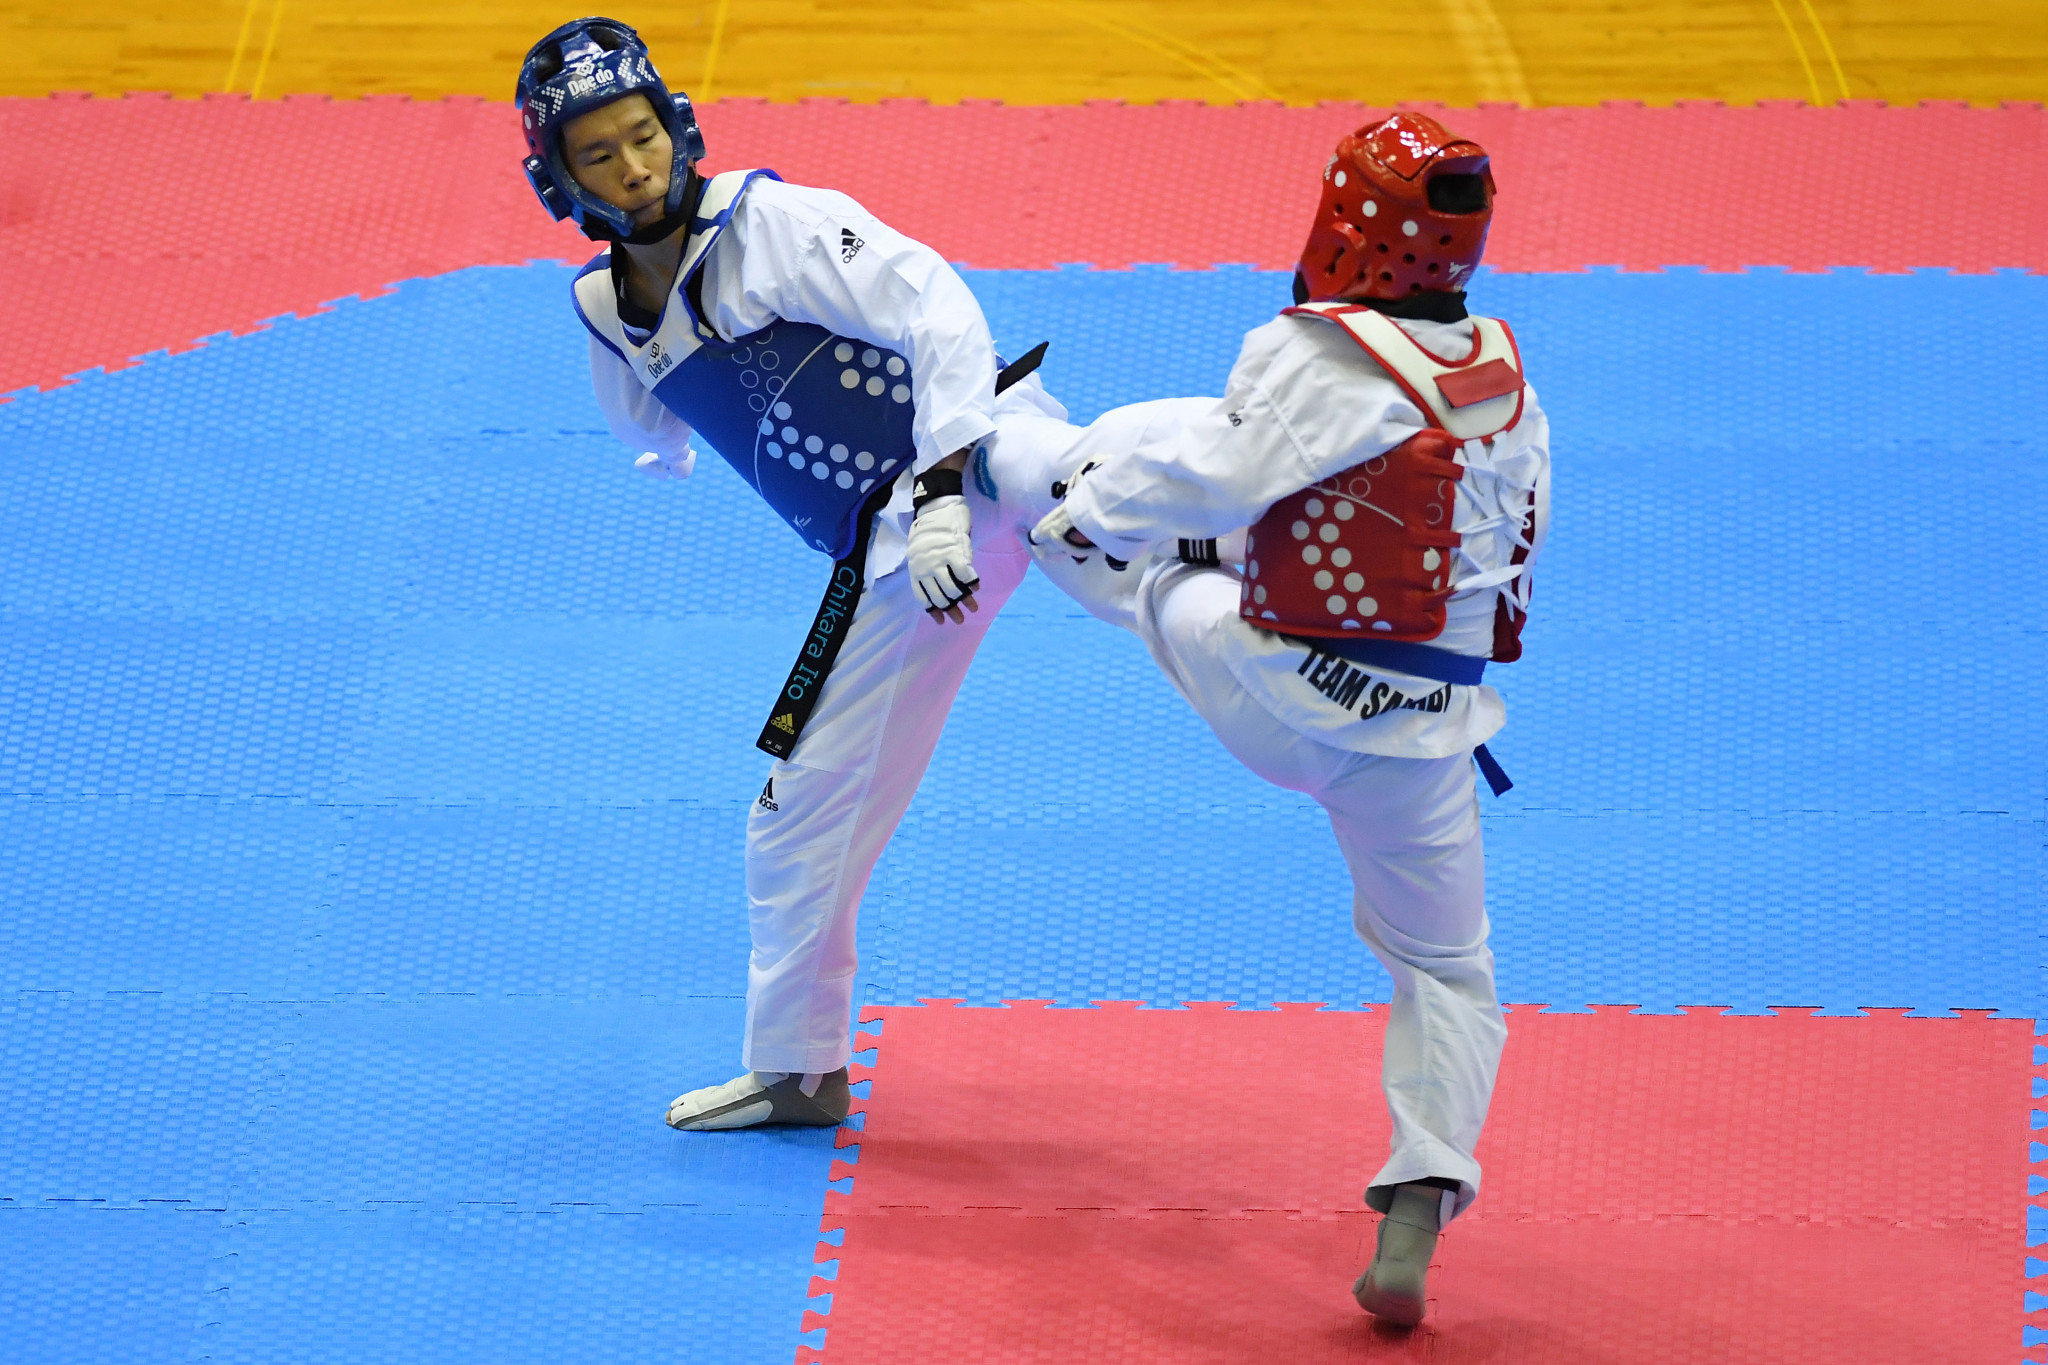 World Taekwondo reconfirm qualification procedure for sport's Paralympic debut